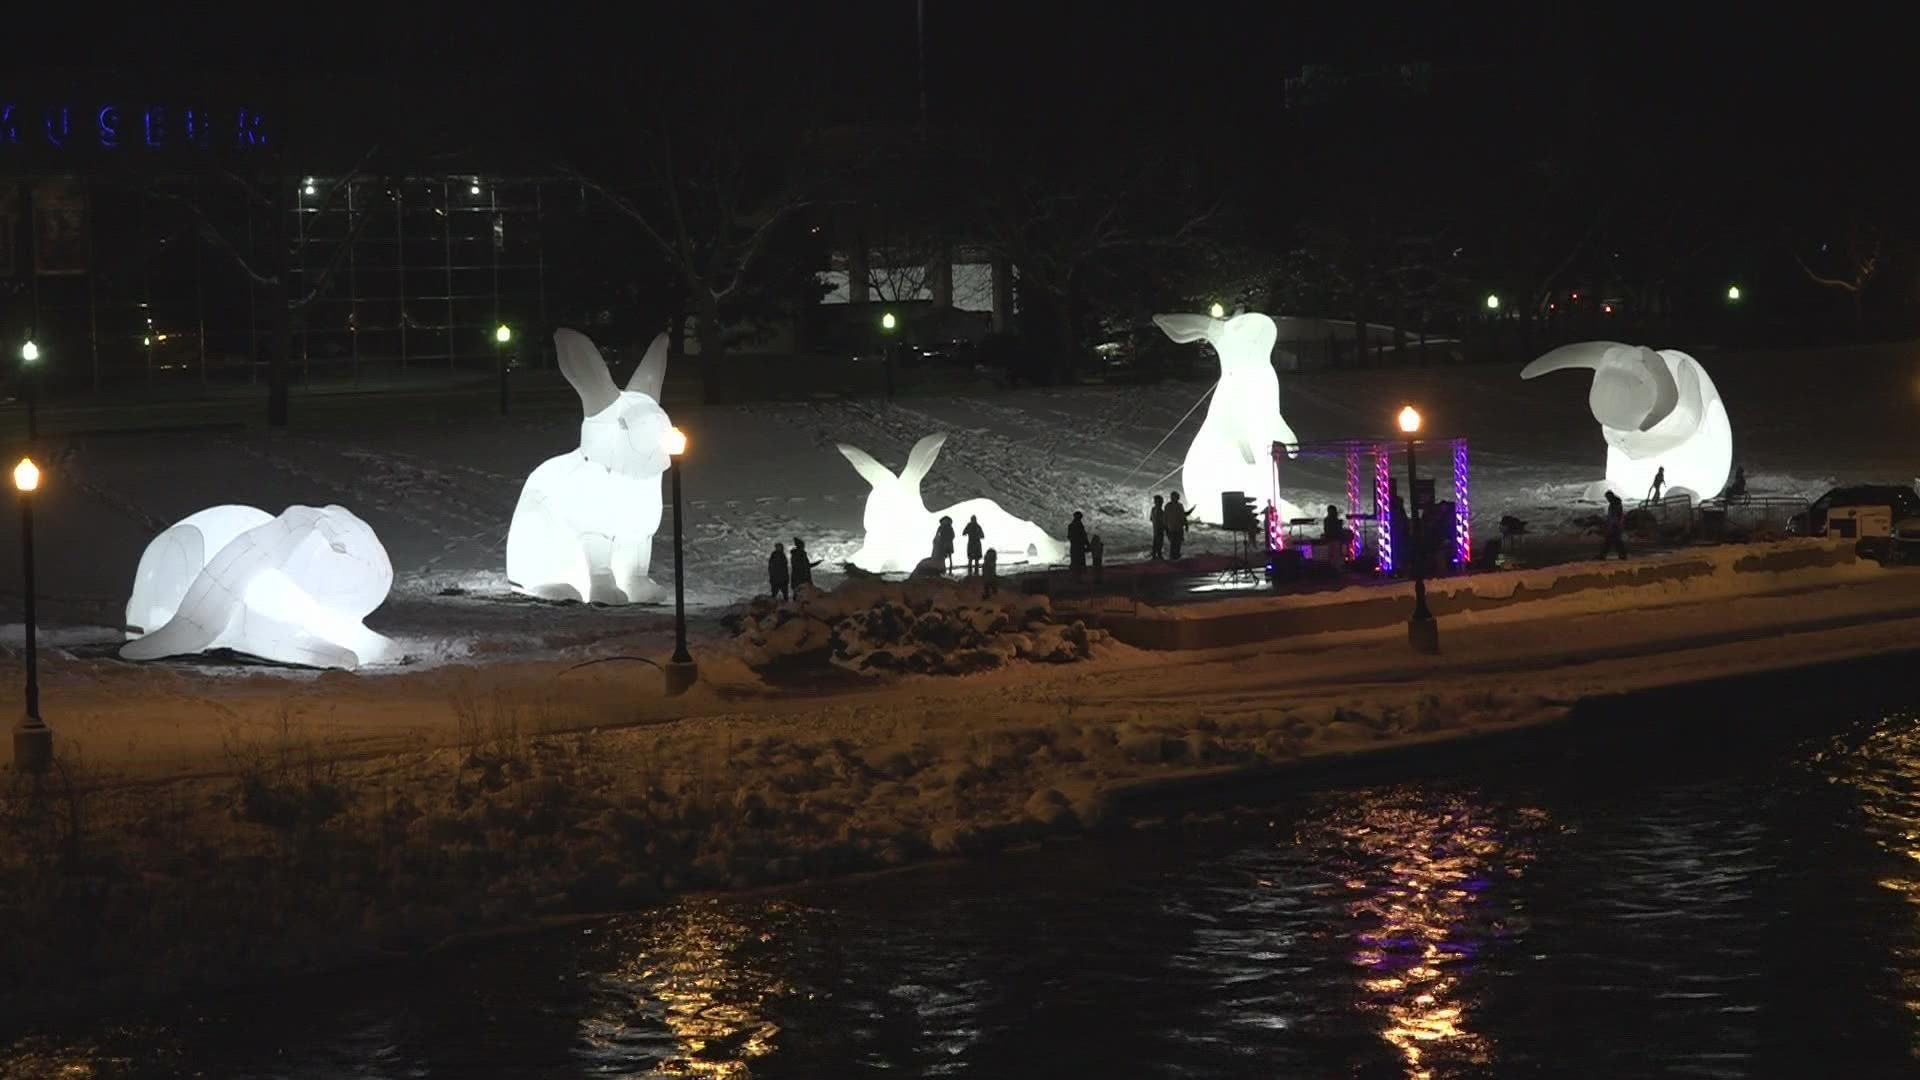 World of Winter kicked off Friday night with multiple art installations around town.